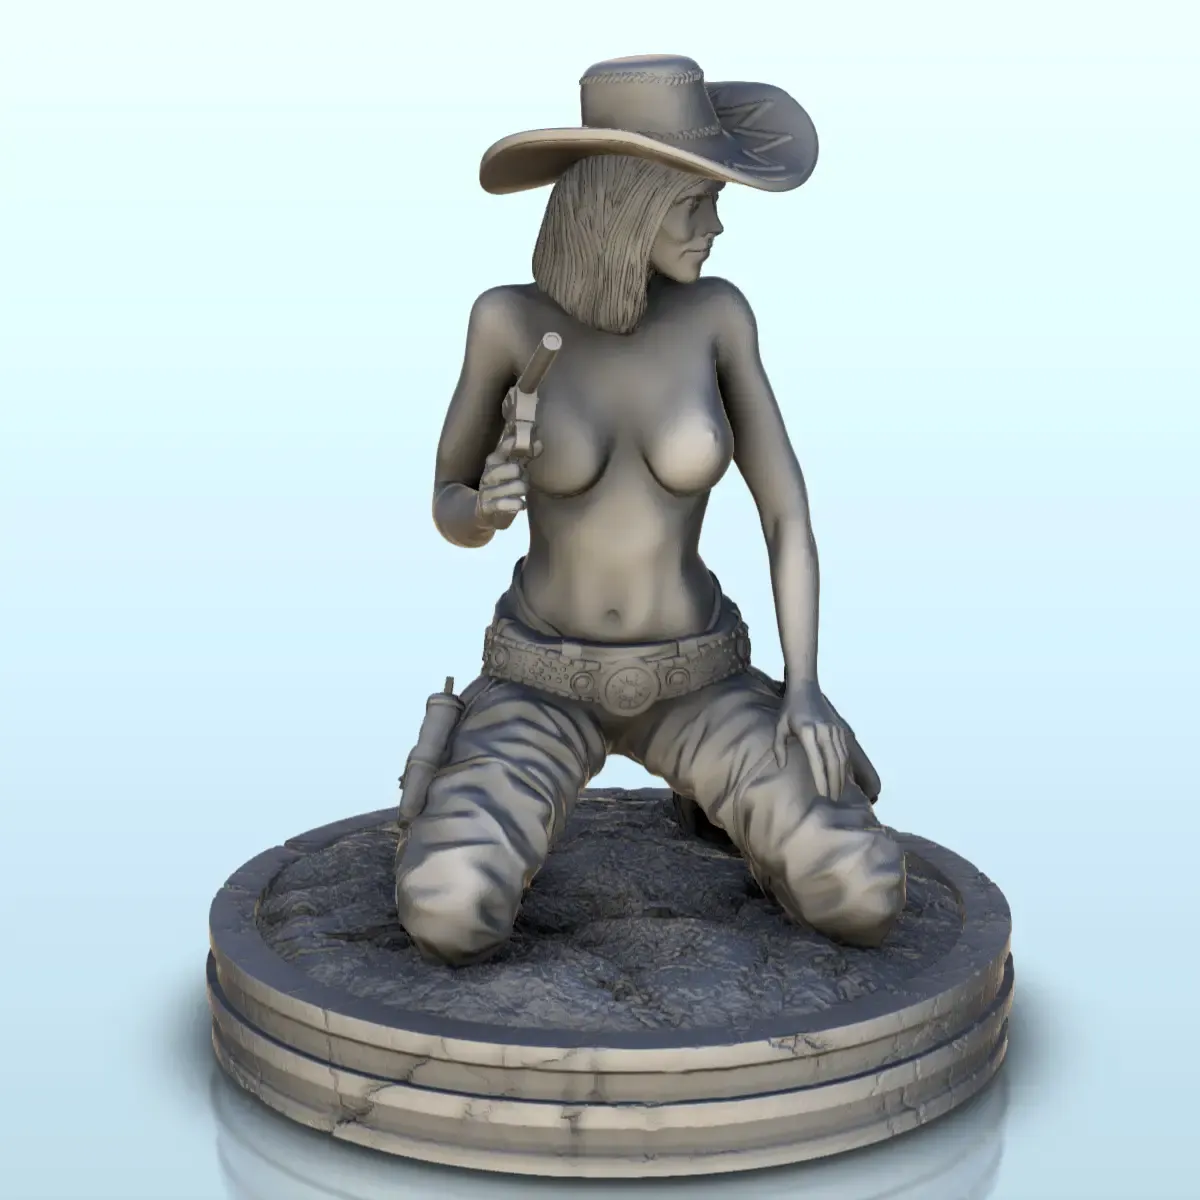 Half-naked woman crouching with revolver (22) - Old West Fig